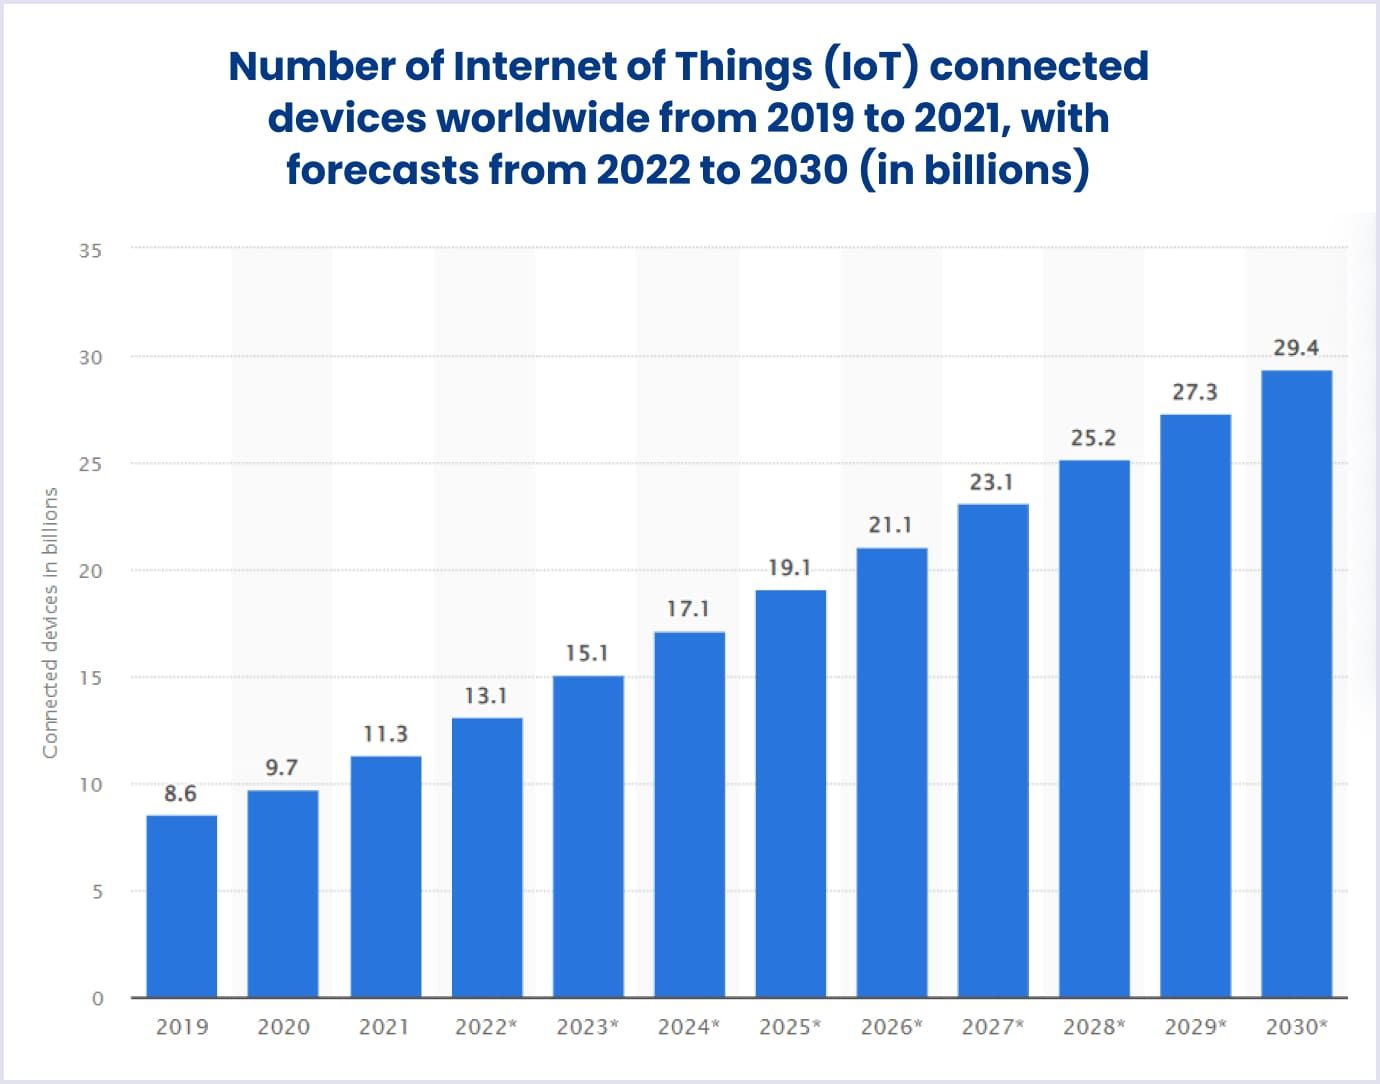 Number of IoT-connected devices worldwide by Statista